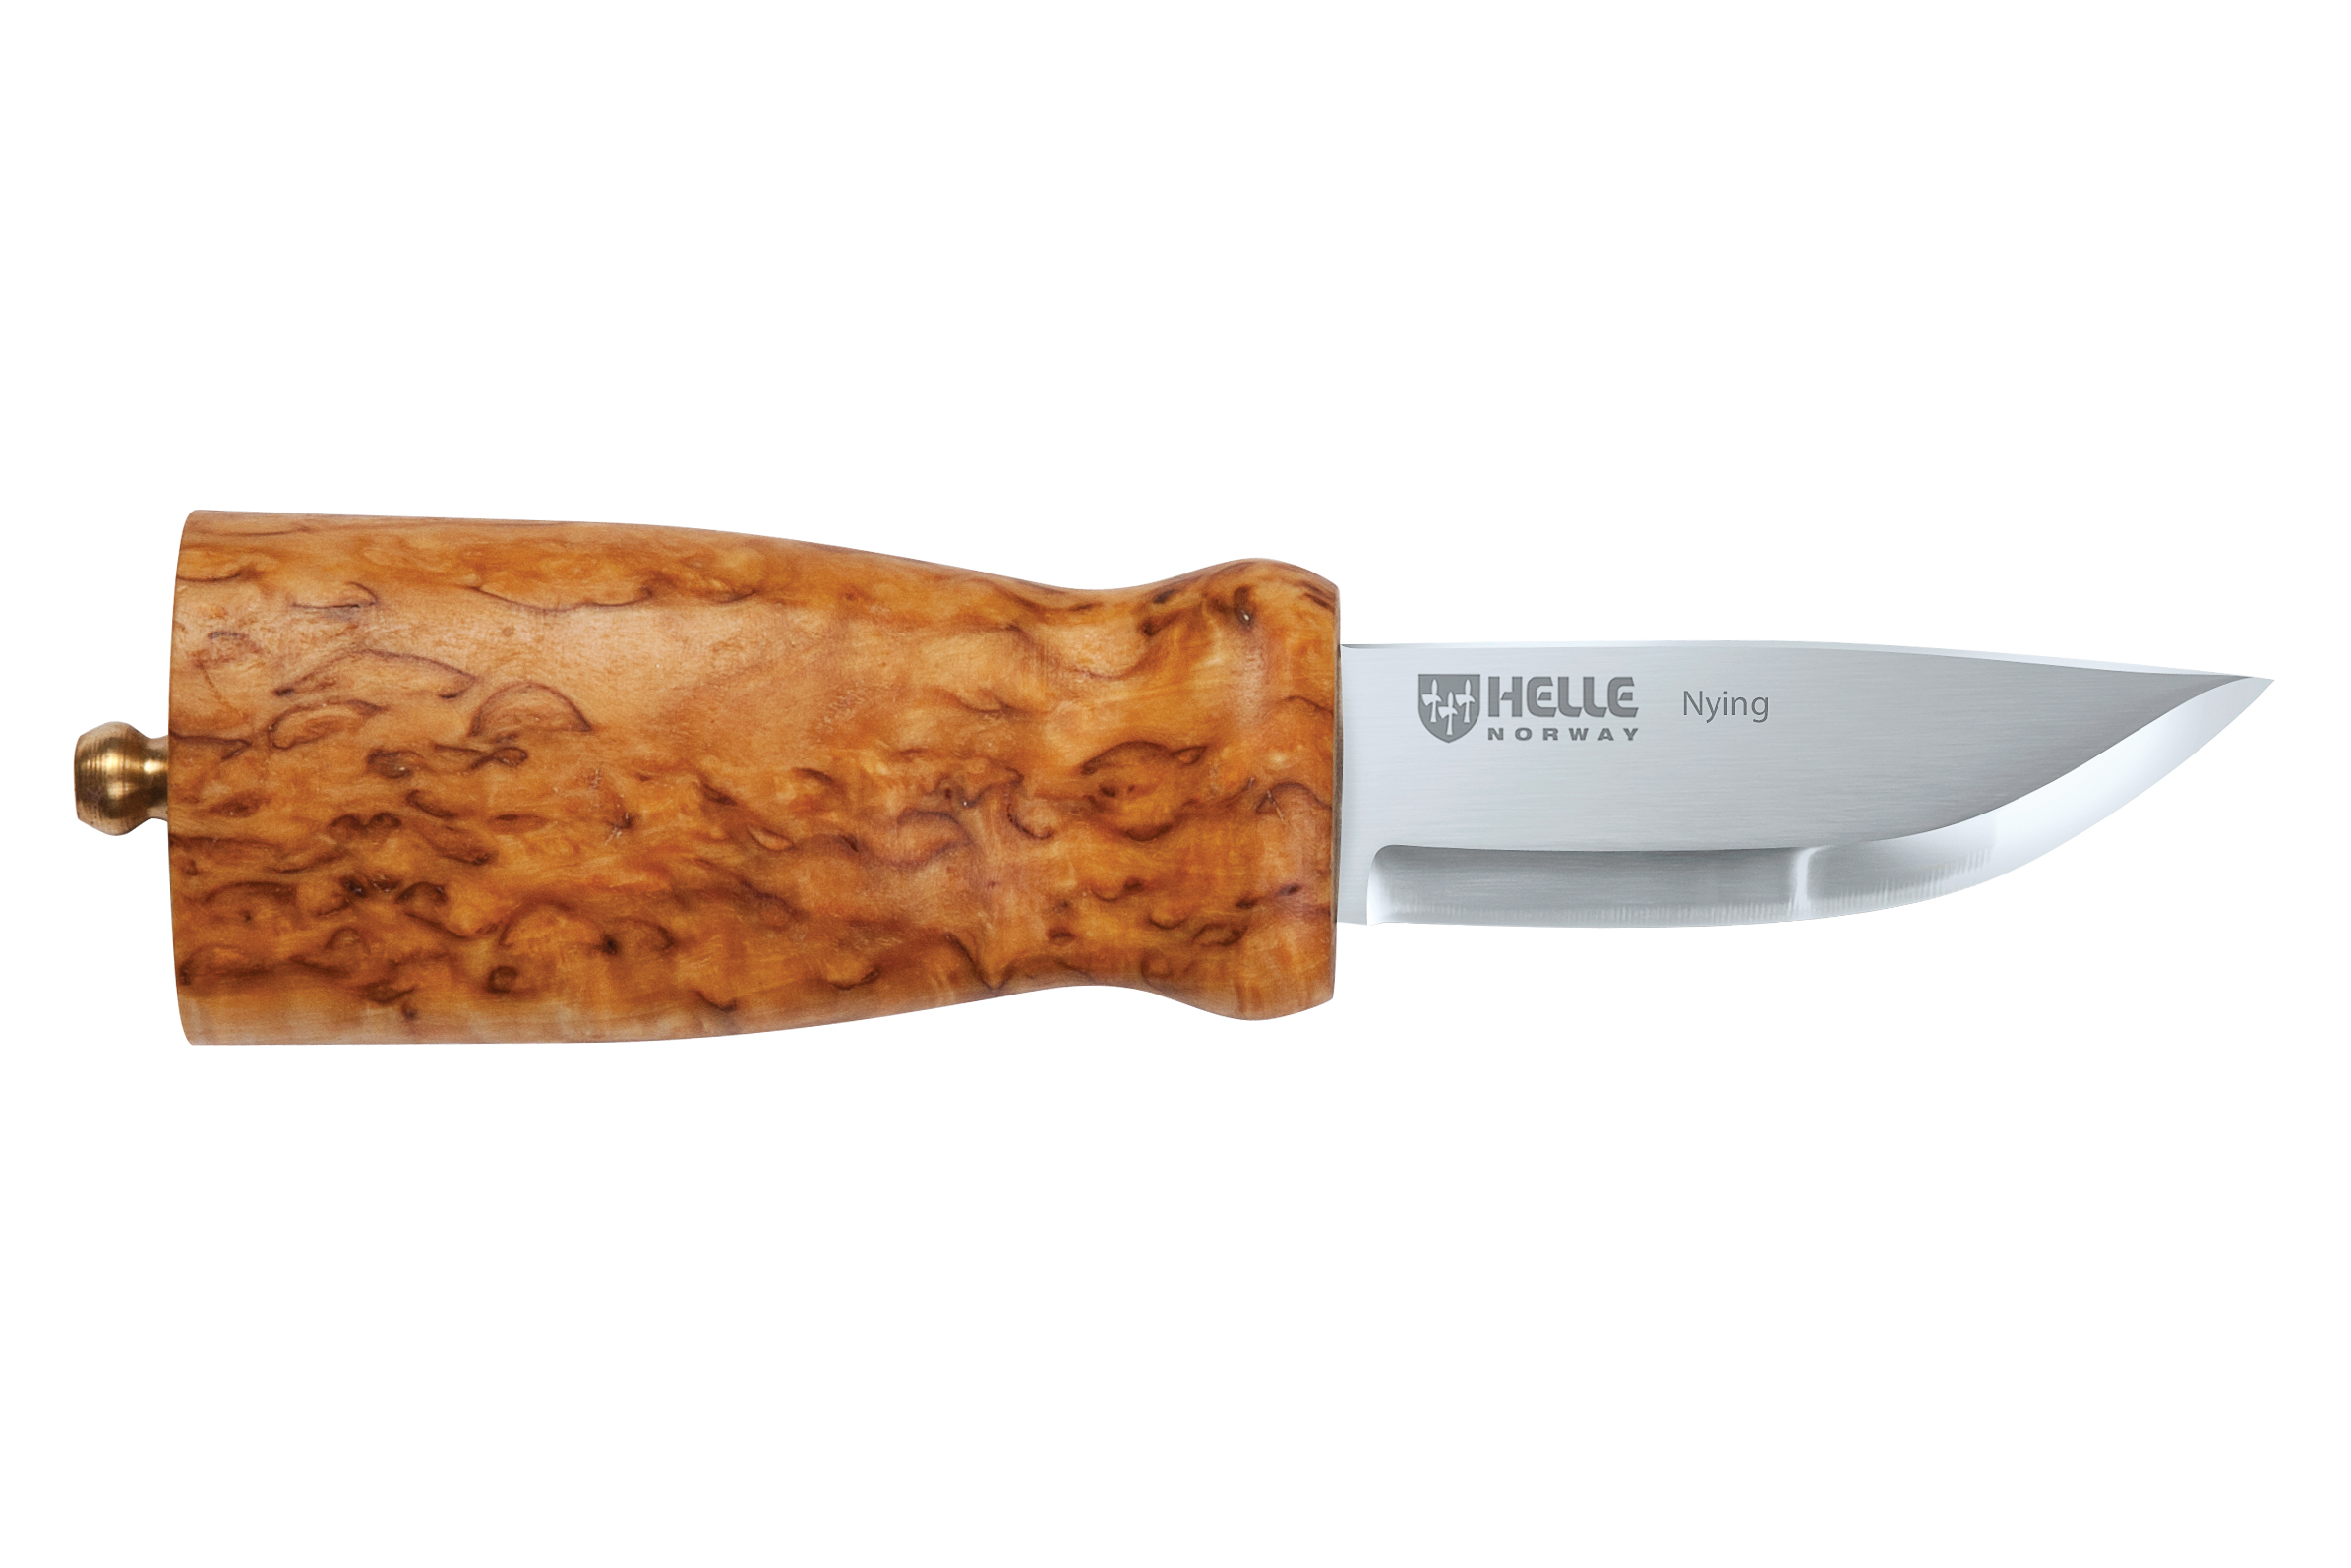 https://www.themanual.com/wp-content/uploads/sites/9/2019/01/nying_helle-knives.jpg?fit=800%2C533&p=1